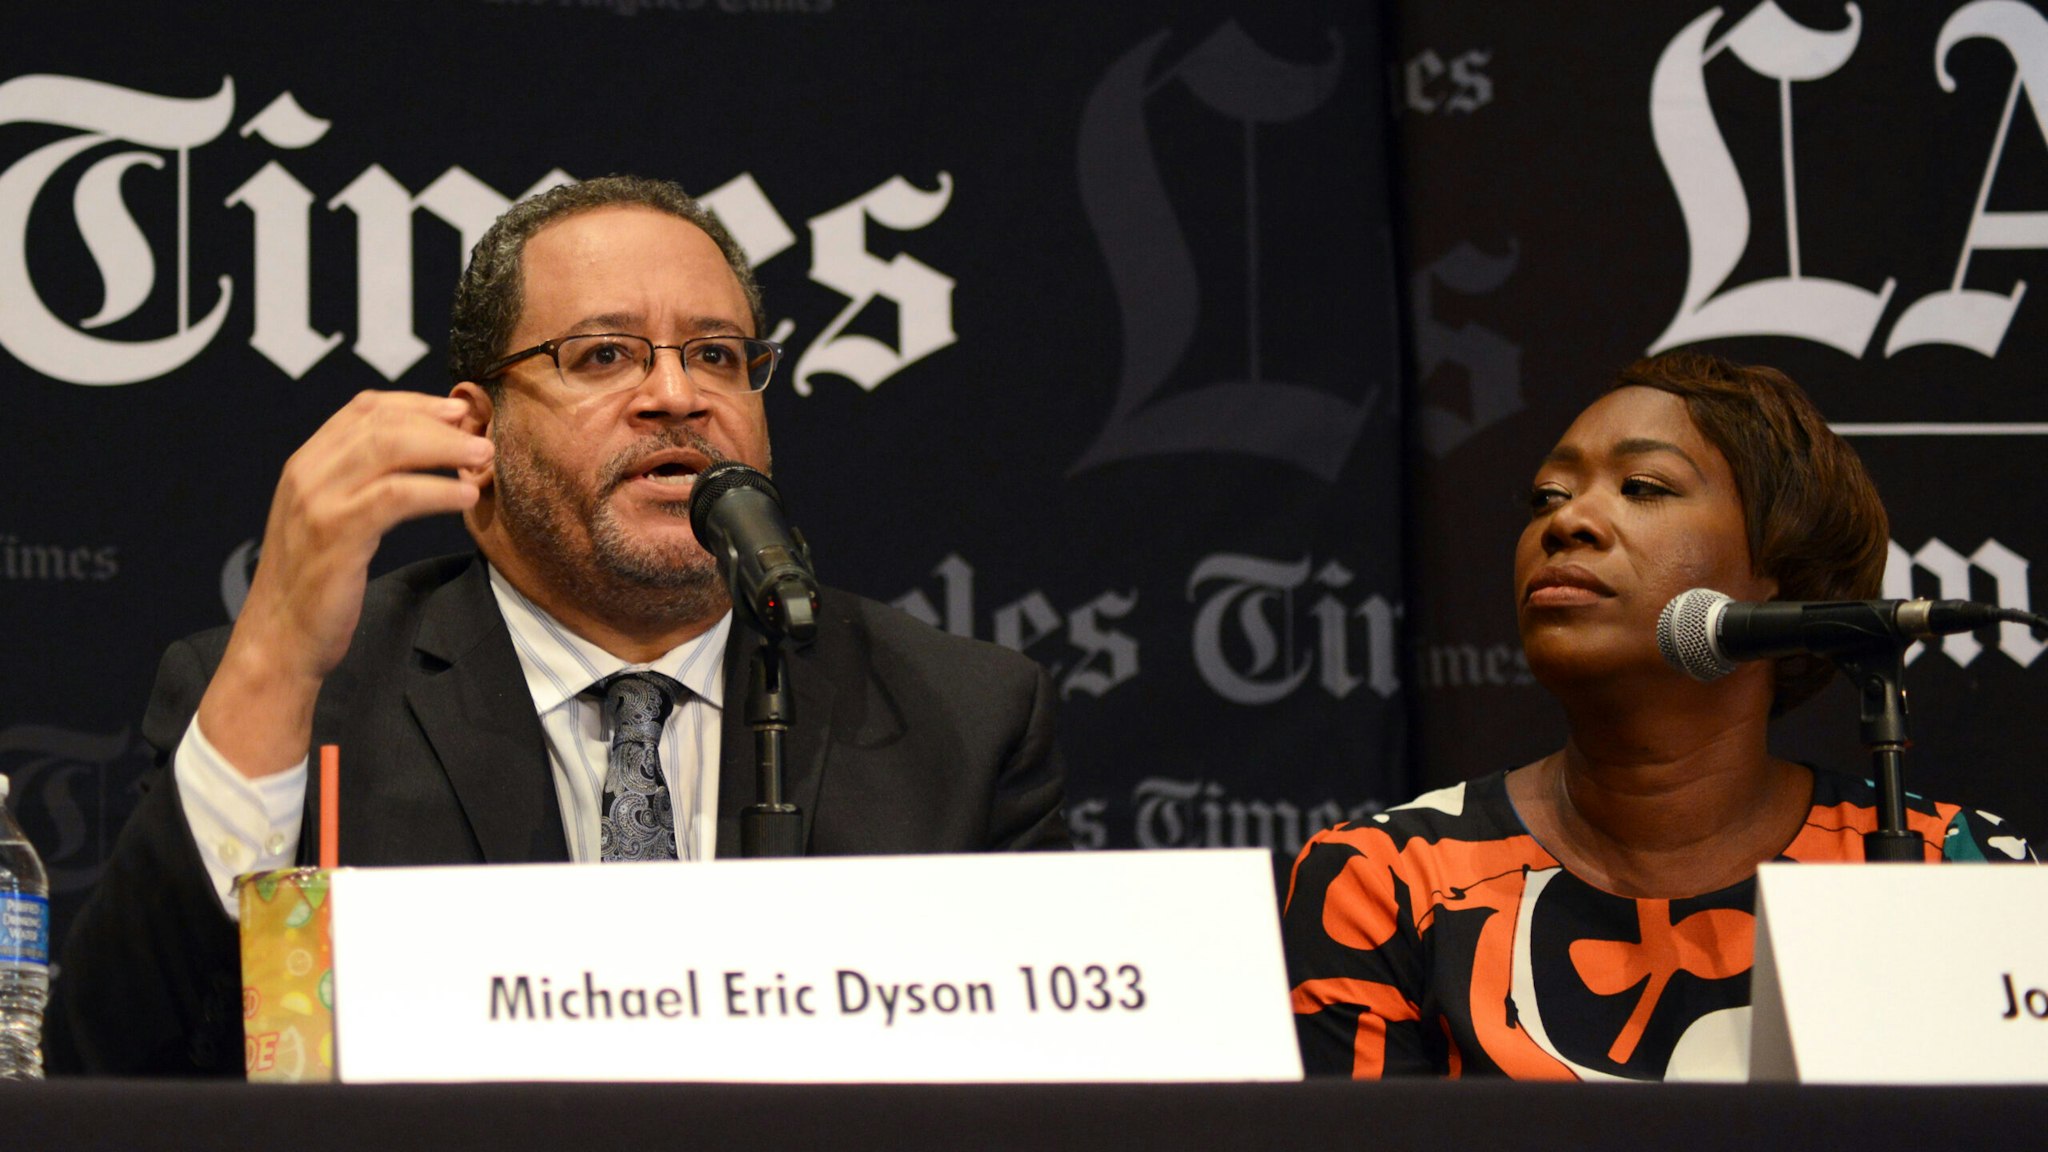 LOS ANGELES, CA - APRIL 22: (L-R) Professor Michael Eric Dyson and Author Joy-Ann Reid attend the Los Angeles Times Festival Of Books at USC on April 22, 2017 in Los Angeles, California.